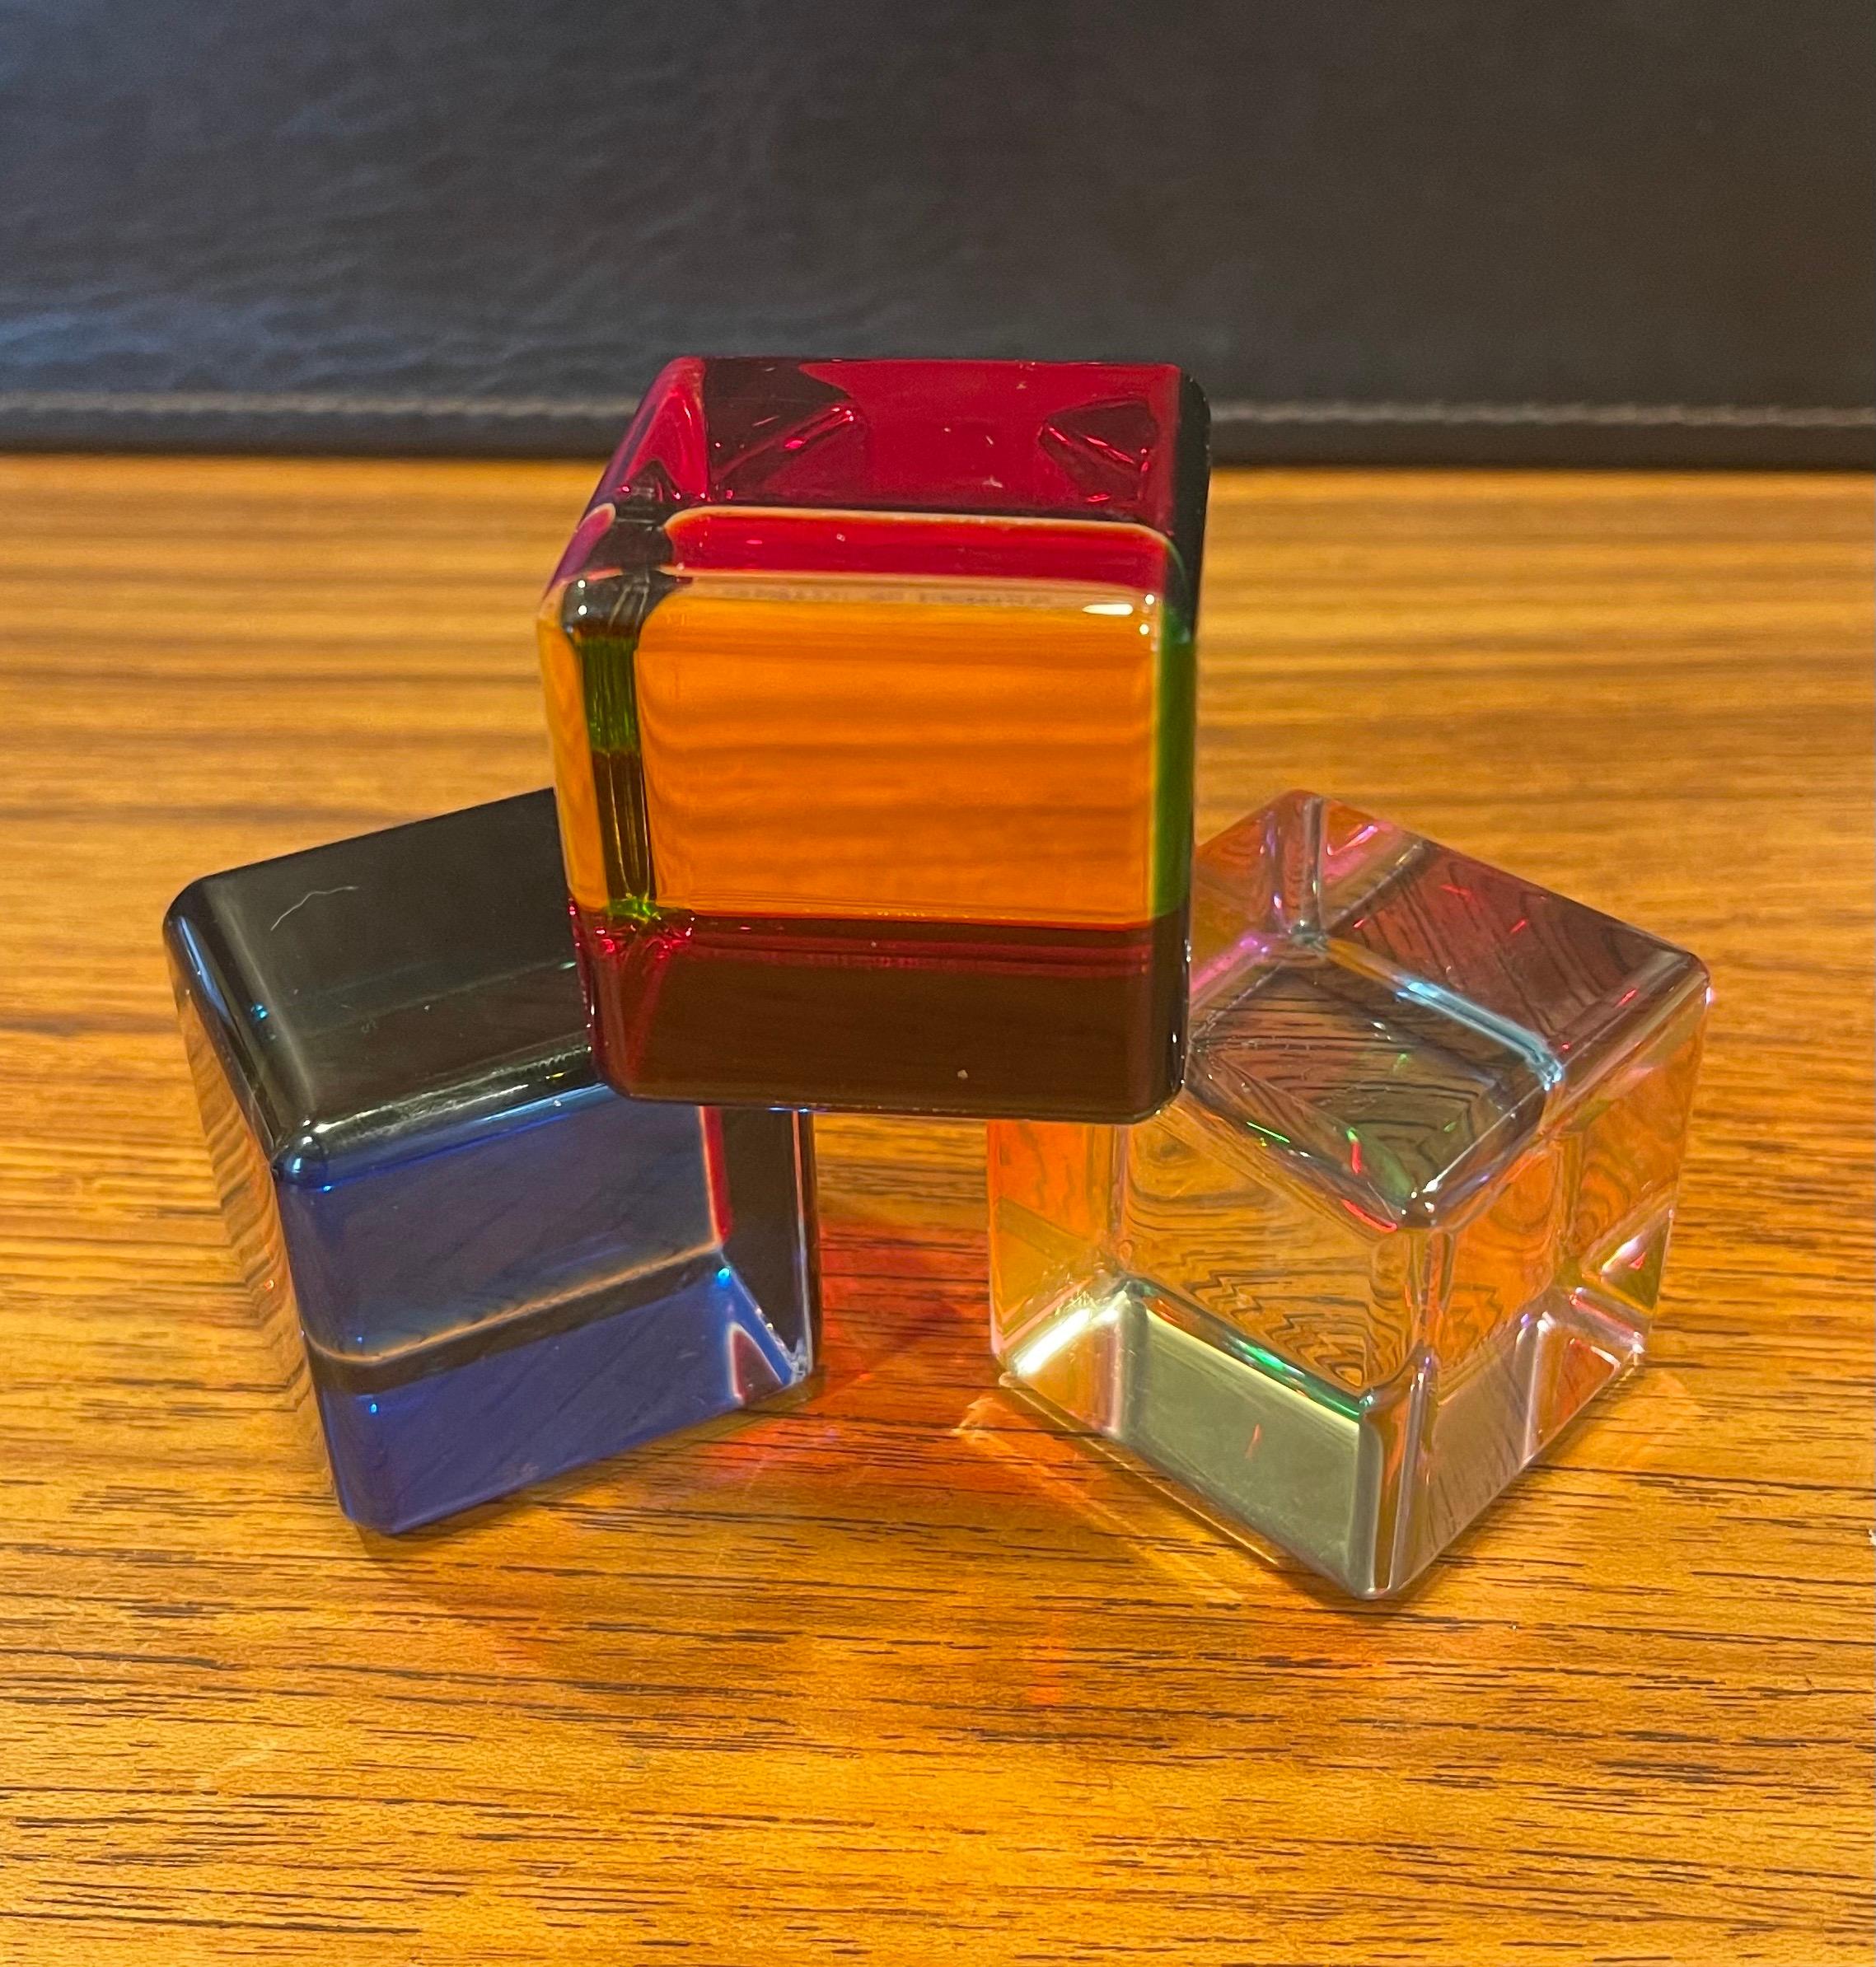 Contemporary Set of Three Op Art Acrylic Cube Sculptures with Box by Vasa Mihich